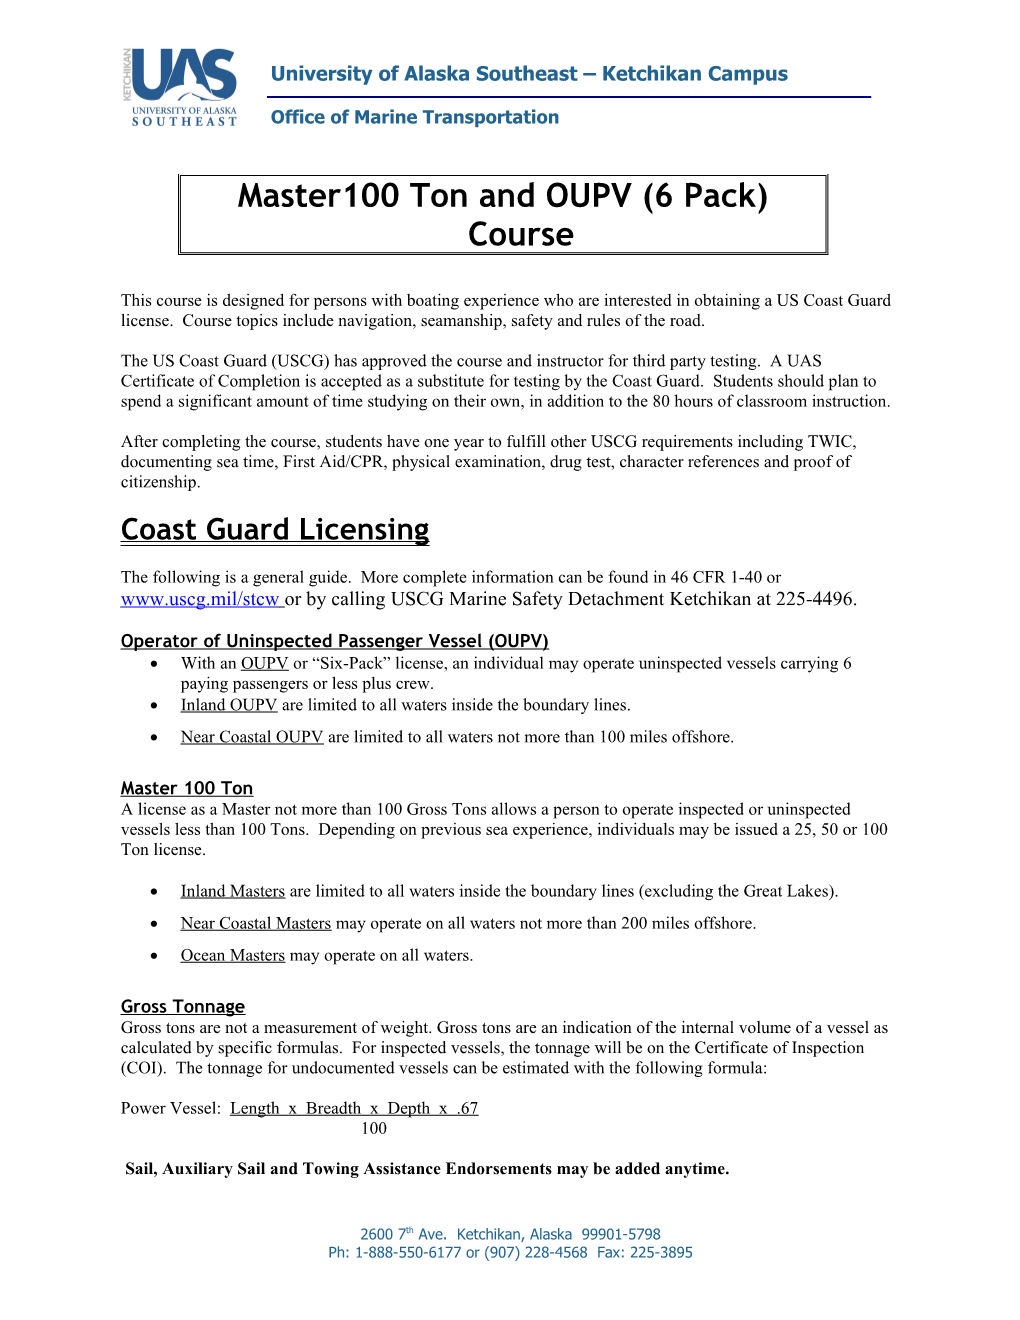 100 Ton and OUPV (6 Pack) Course